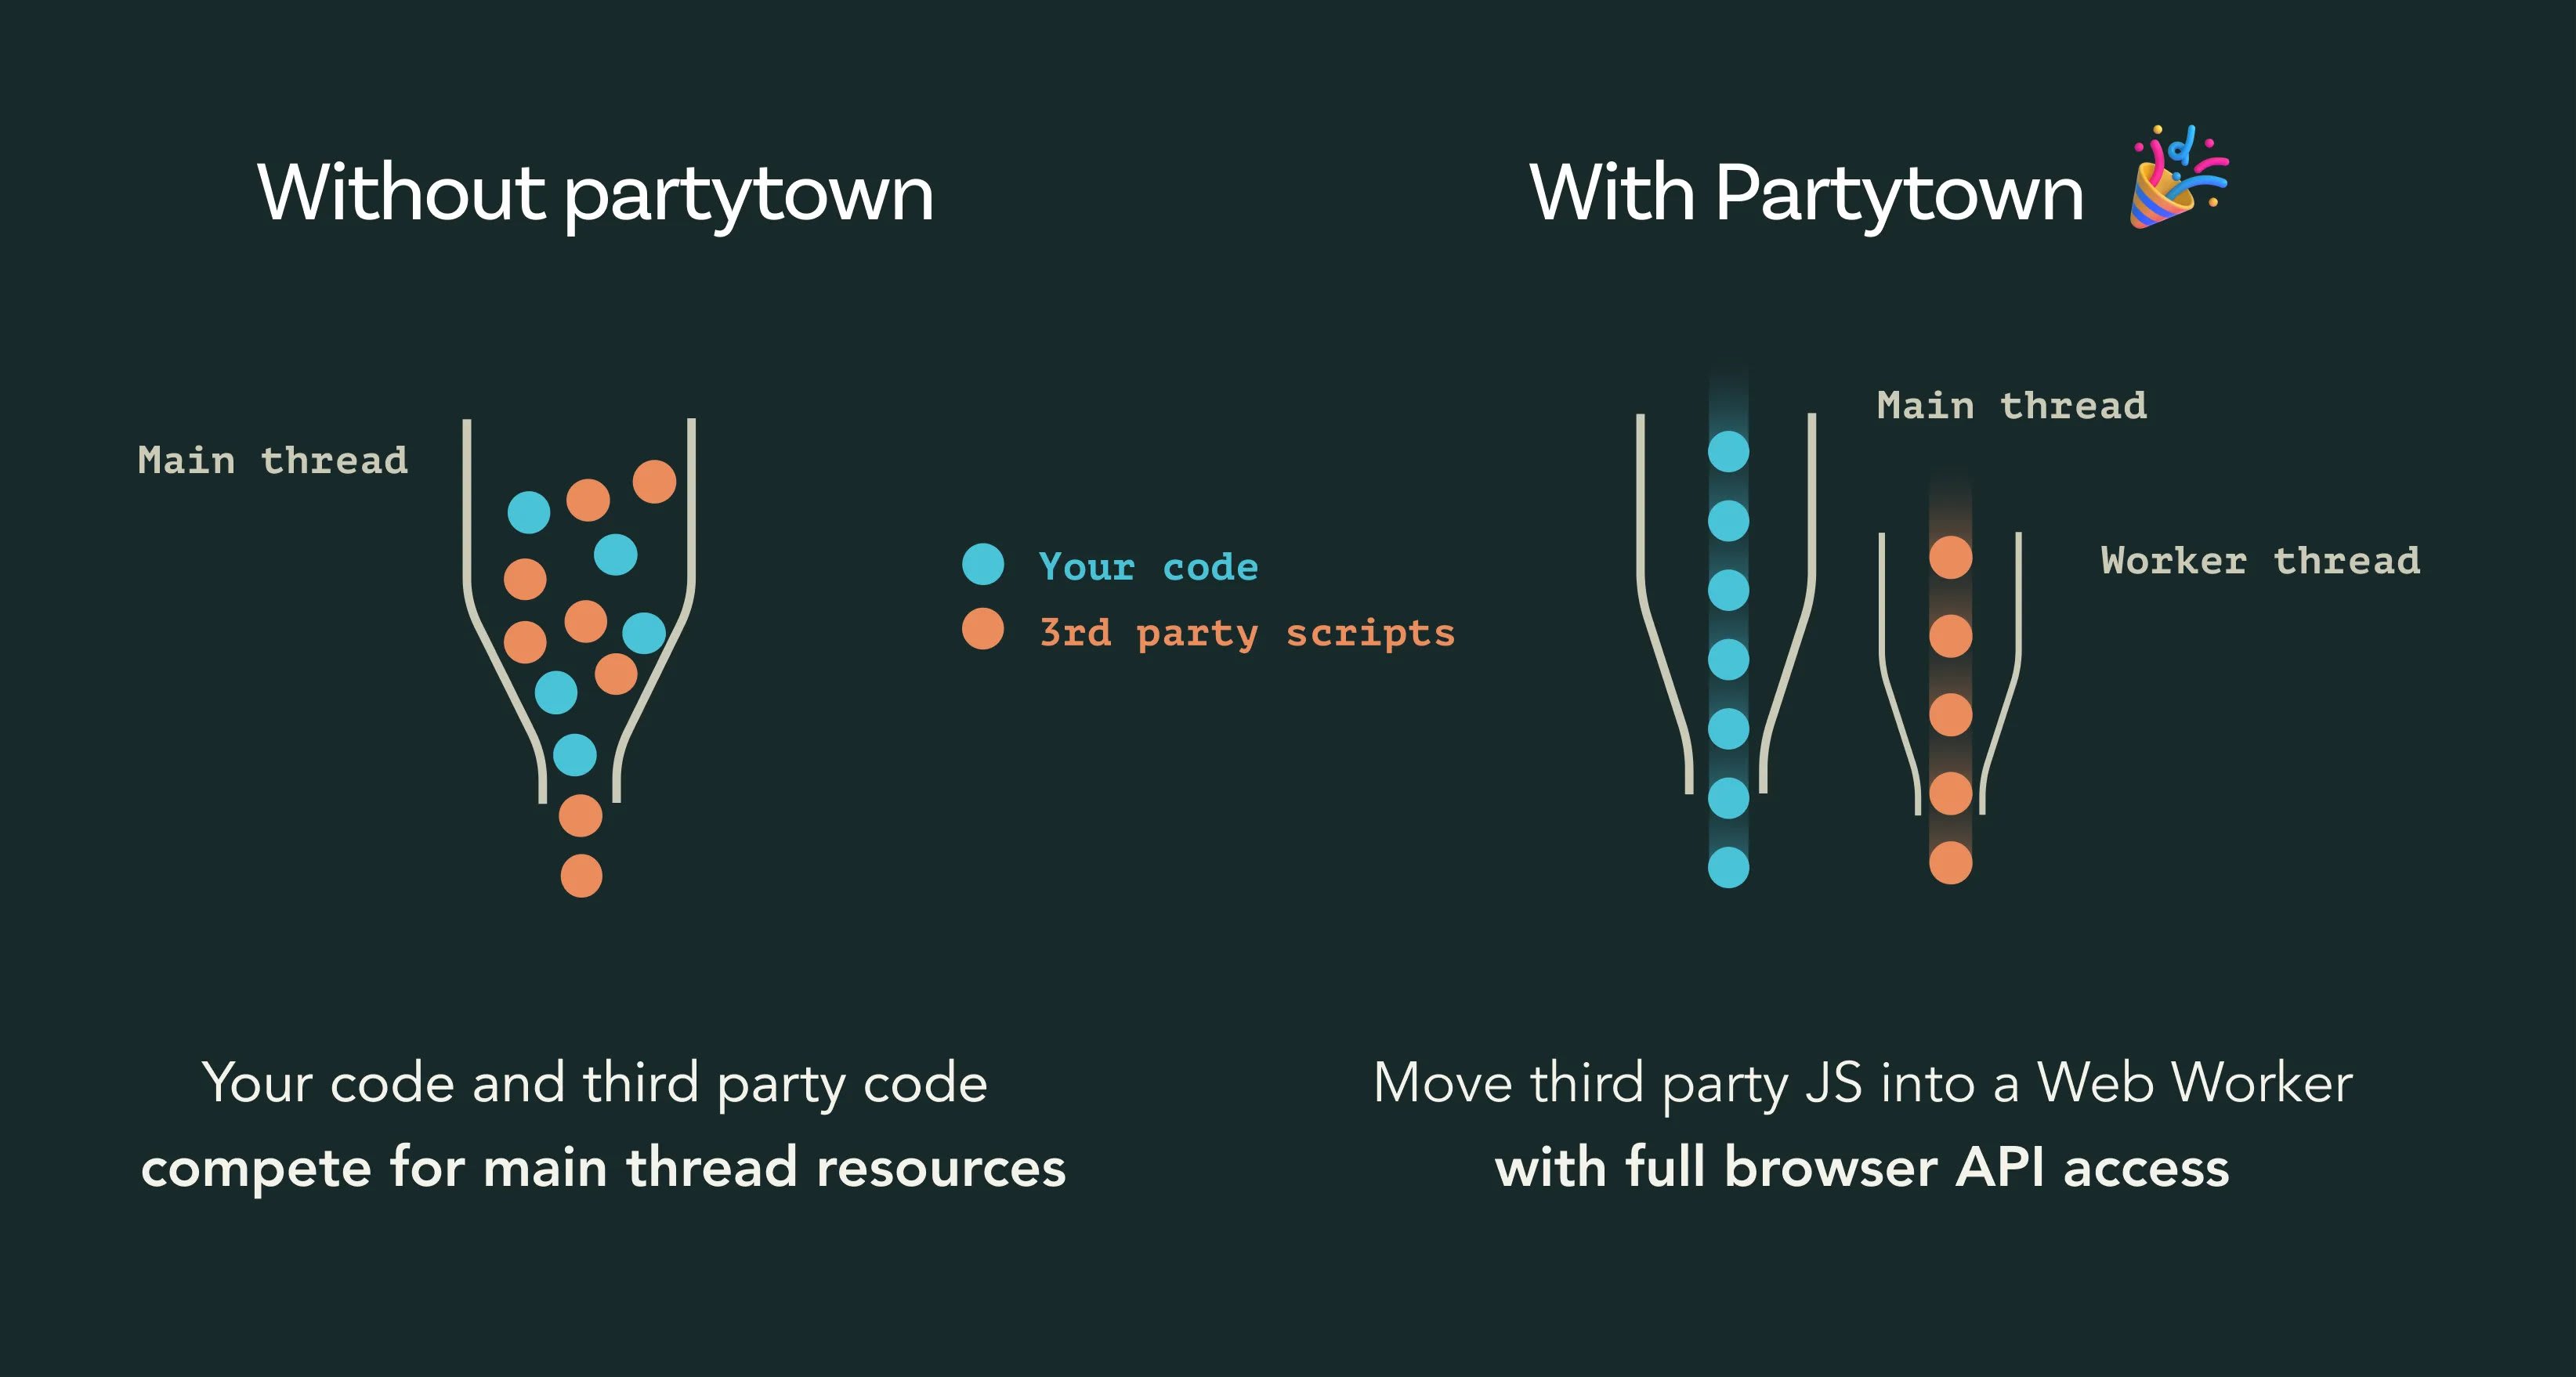 Without Partytown and With Partytown: Your code and third-party code compete for main thread resources